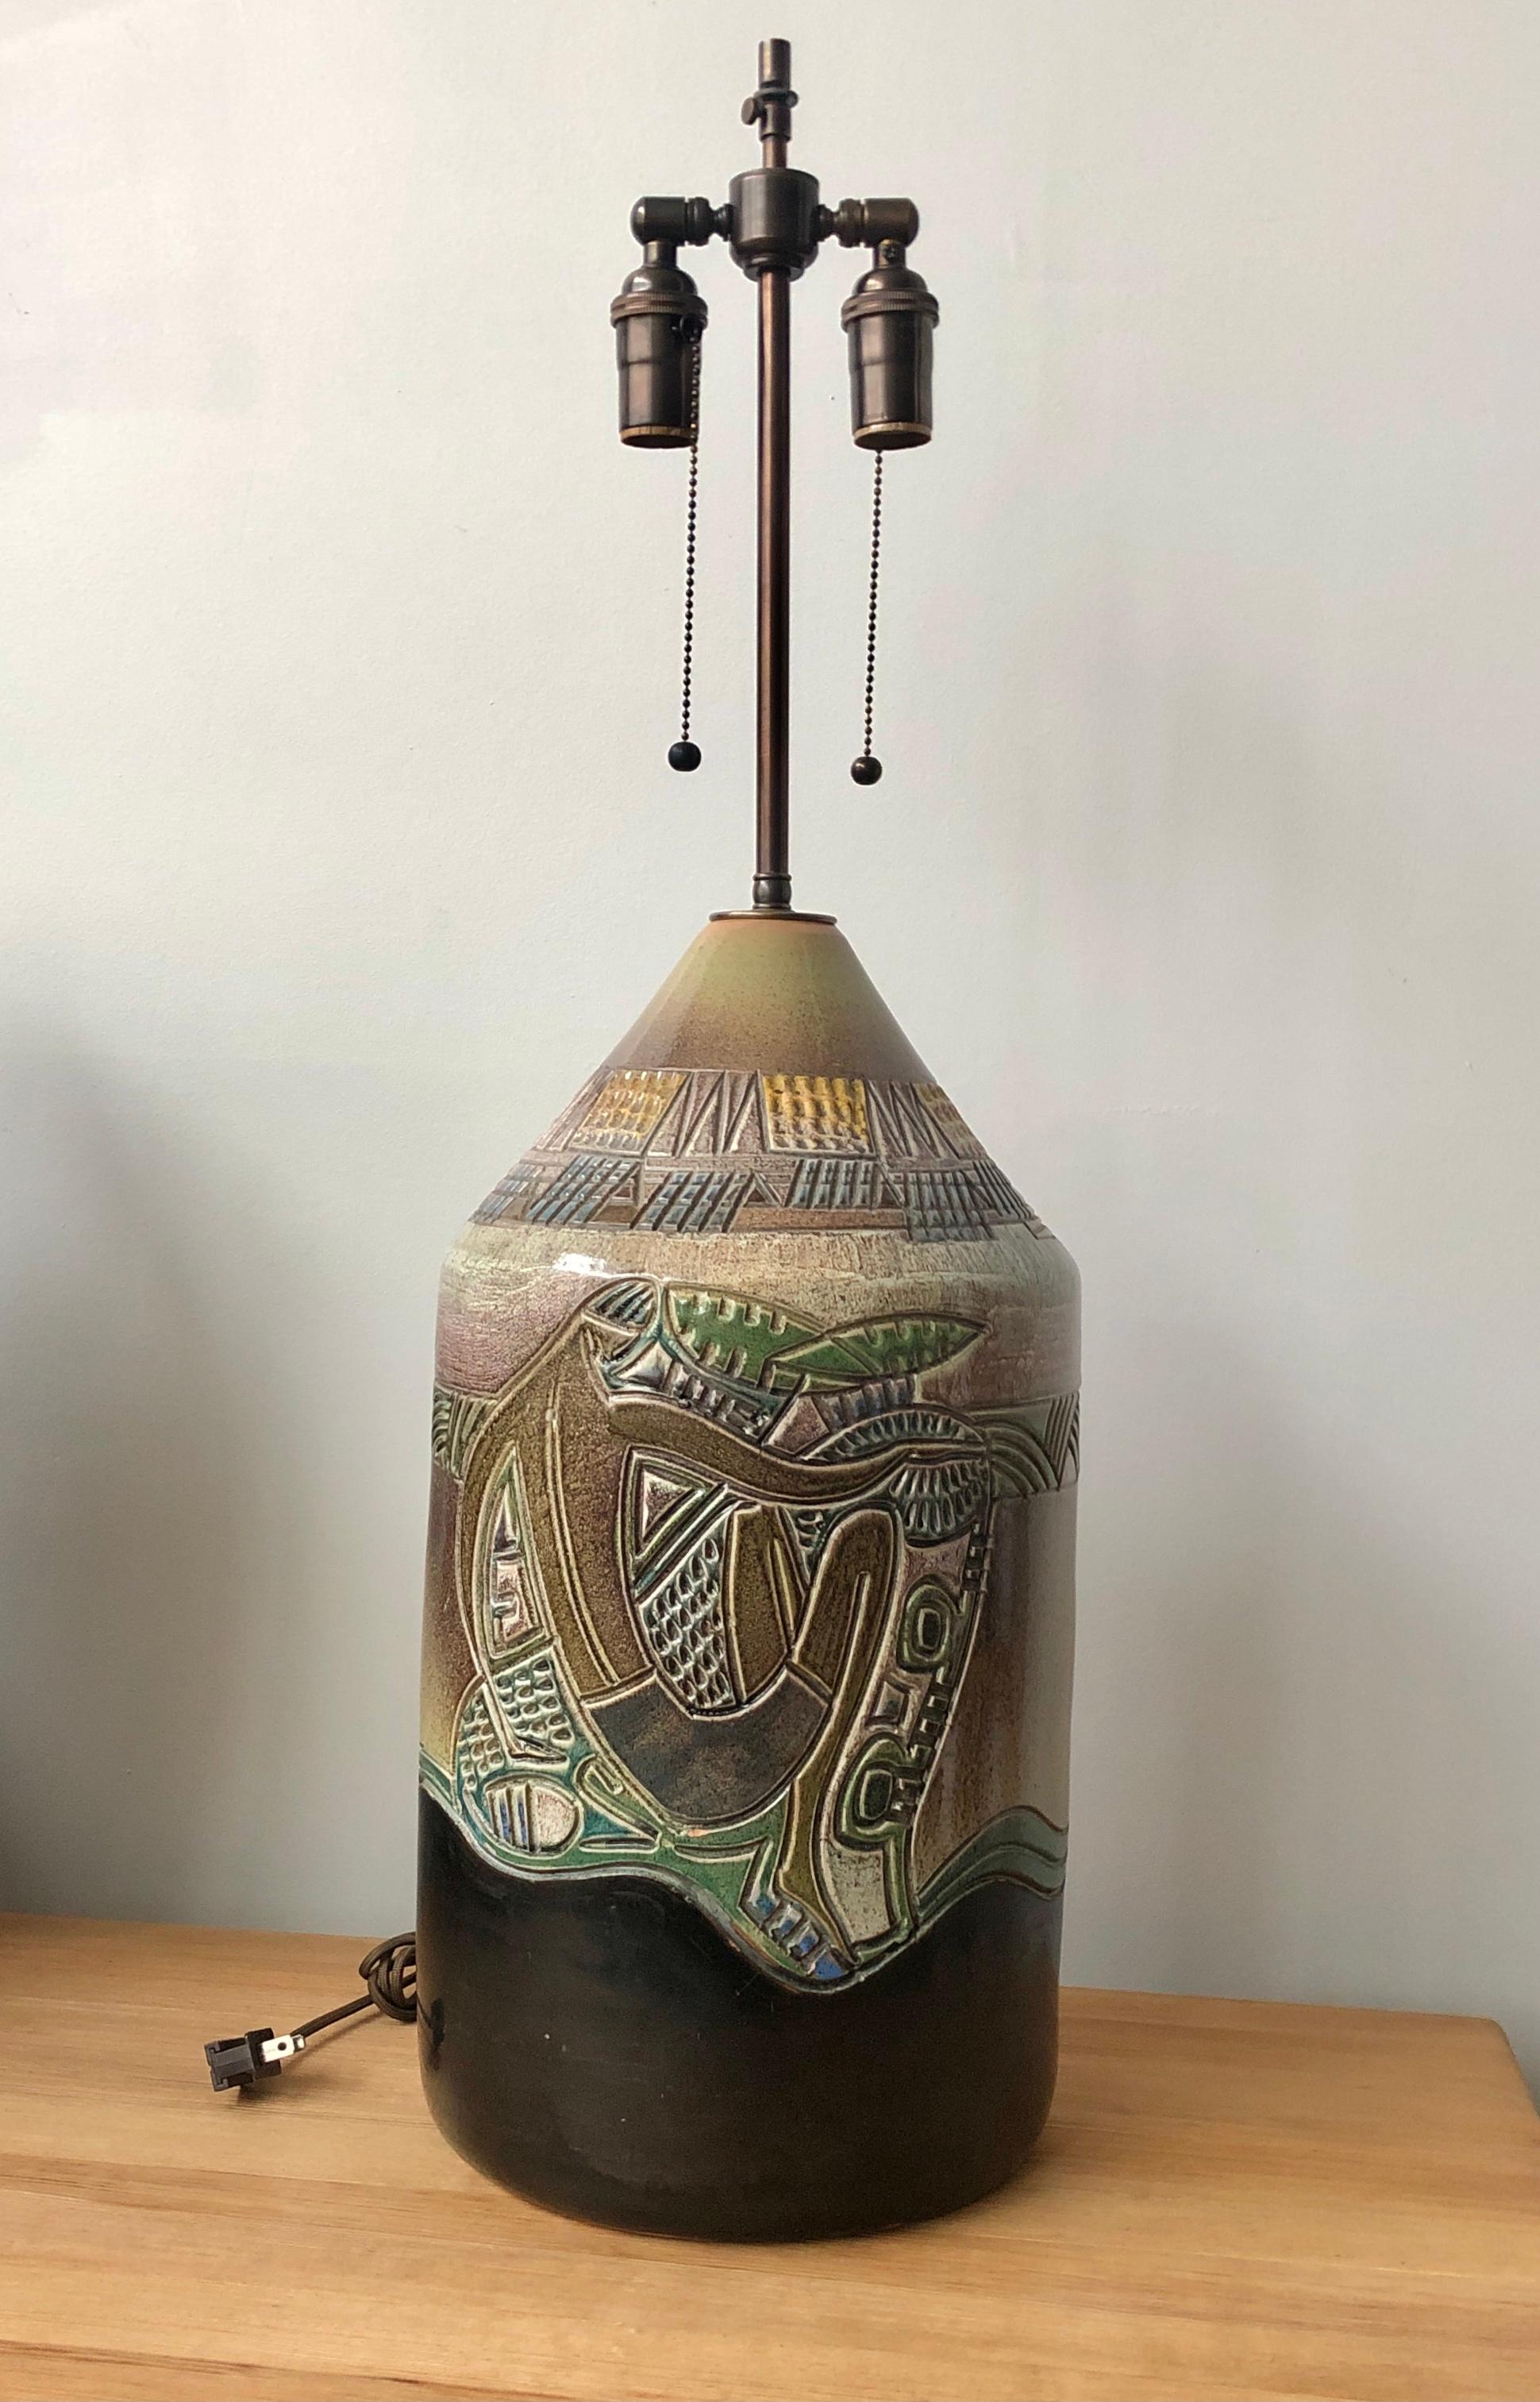 Large table lamp by Marian Zawadzki (Sweden, 1912-1978).
Marked M.Z.1965.
Minor chips. Recently rewired. Measures: Base height 19